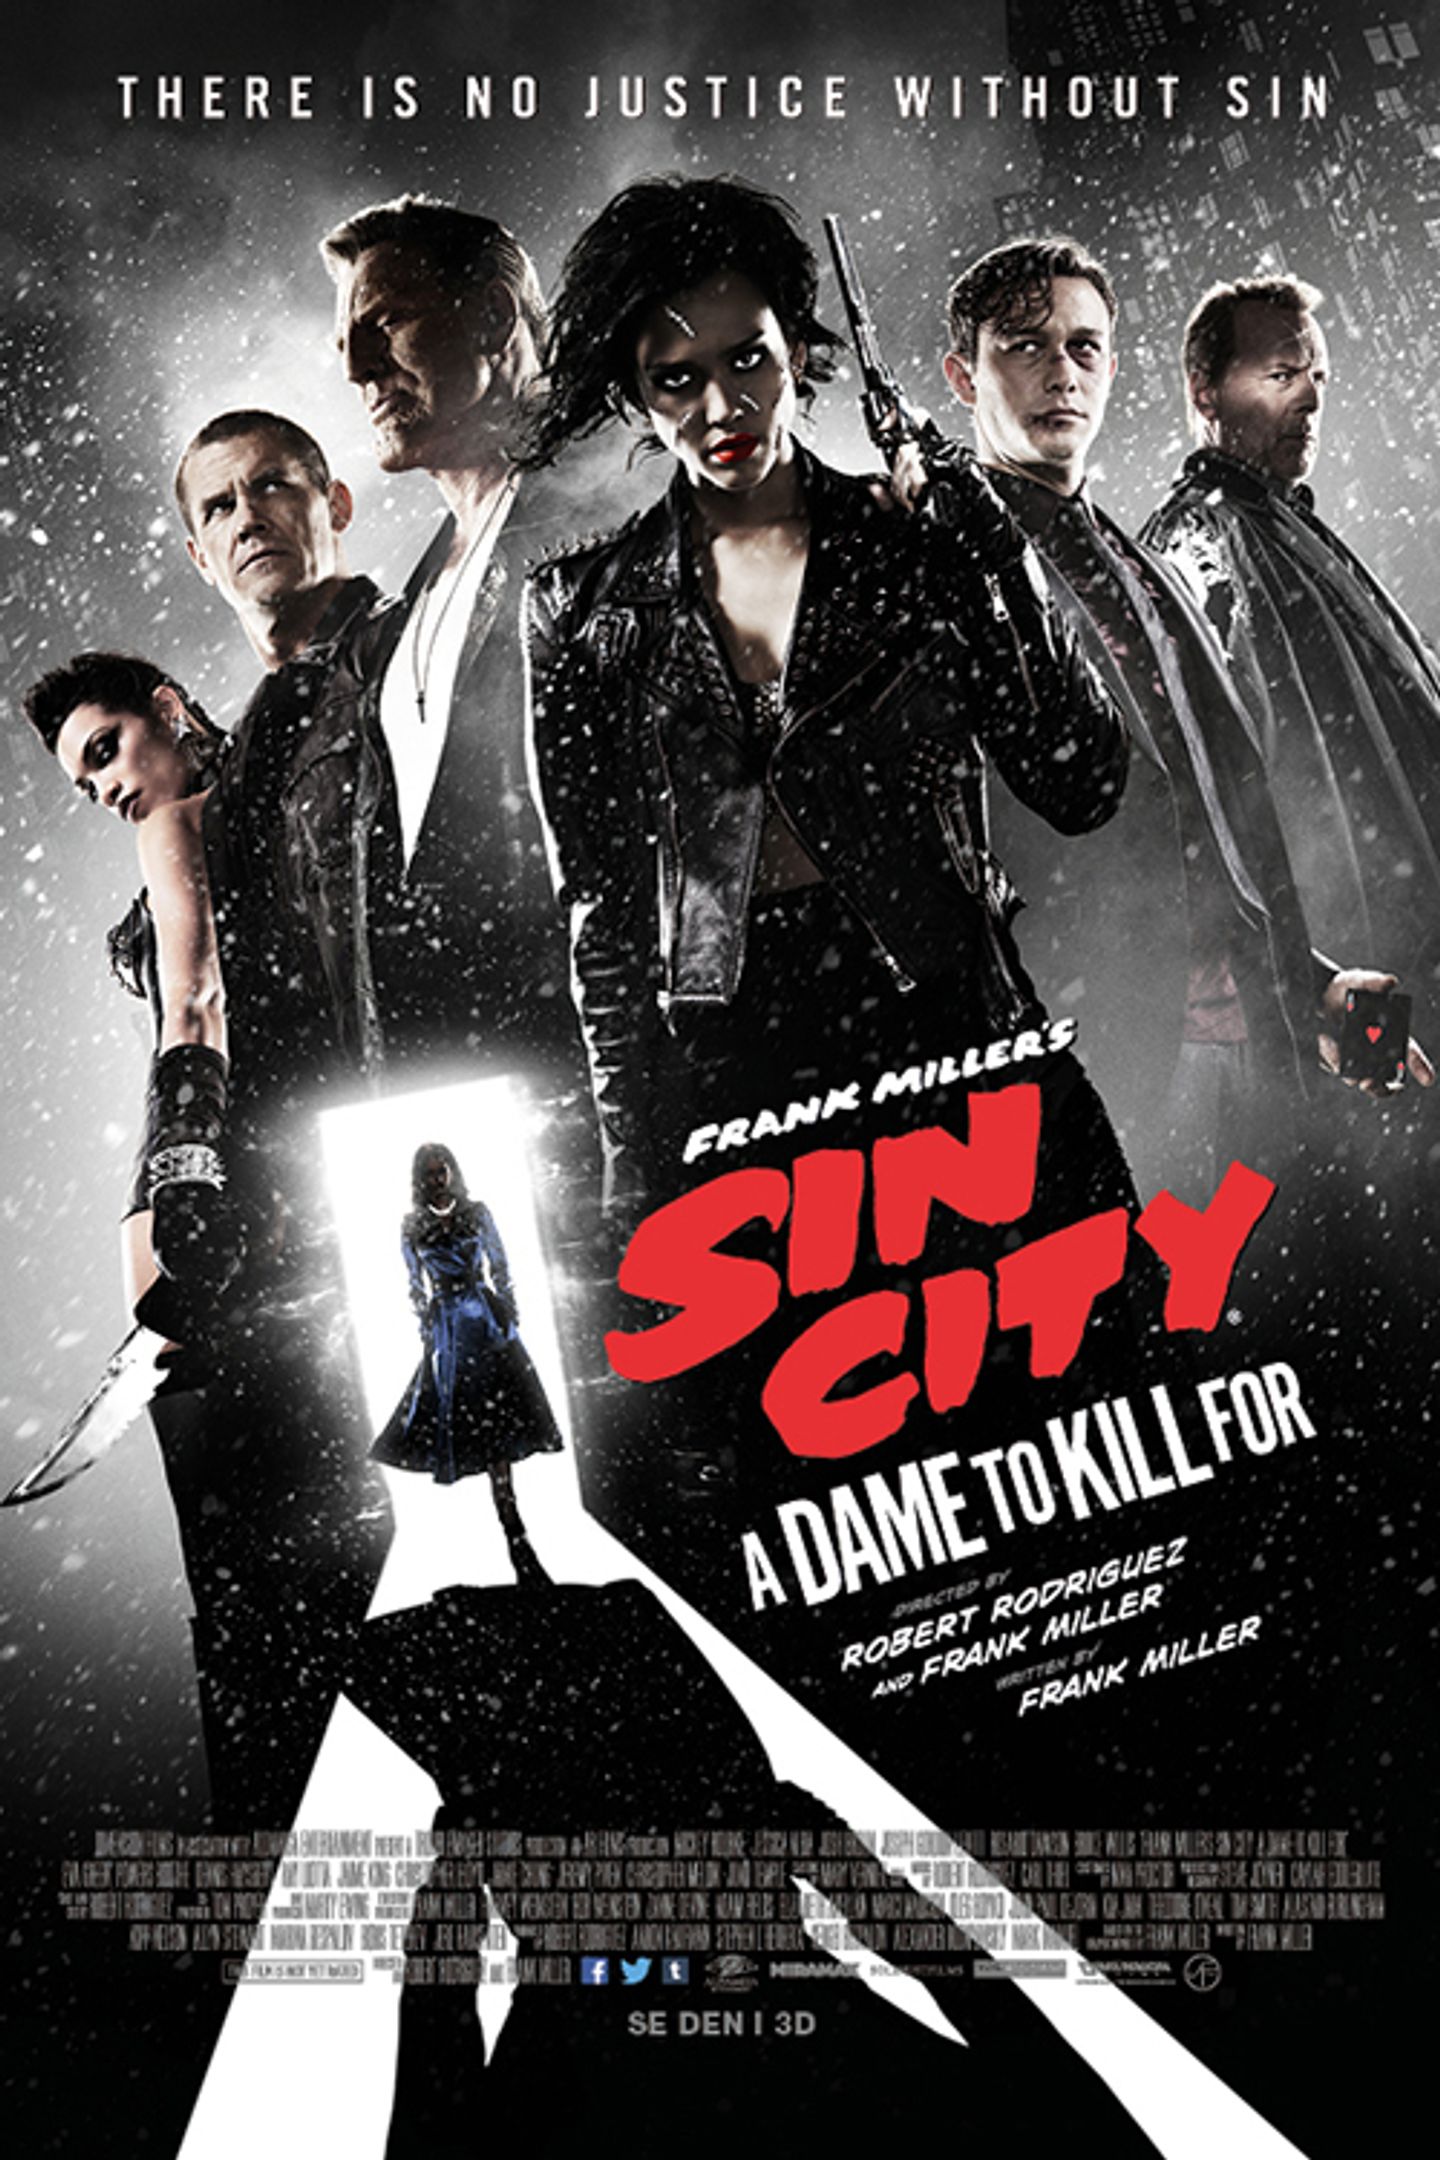 Frank Miller's Sin City: A Dame To Kill For